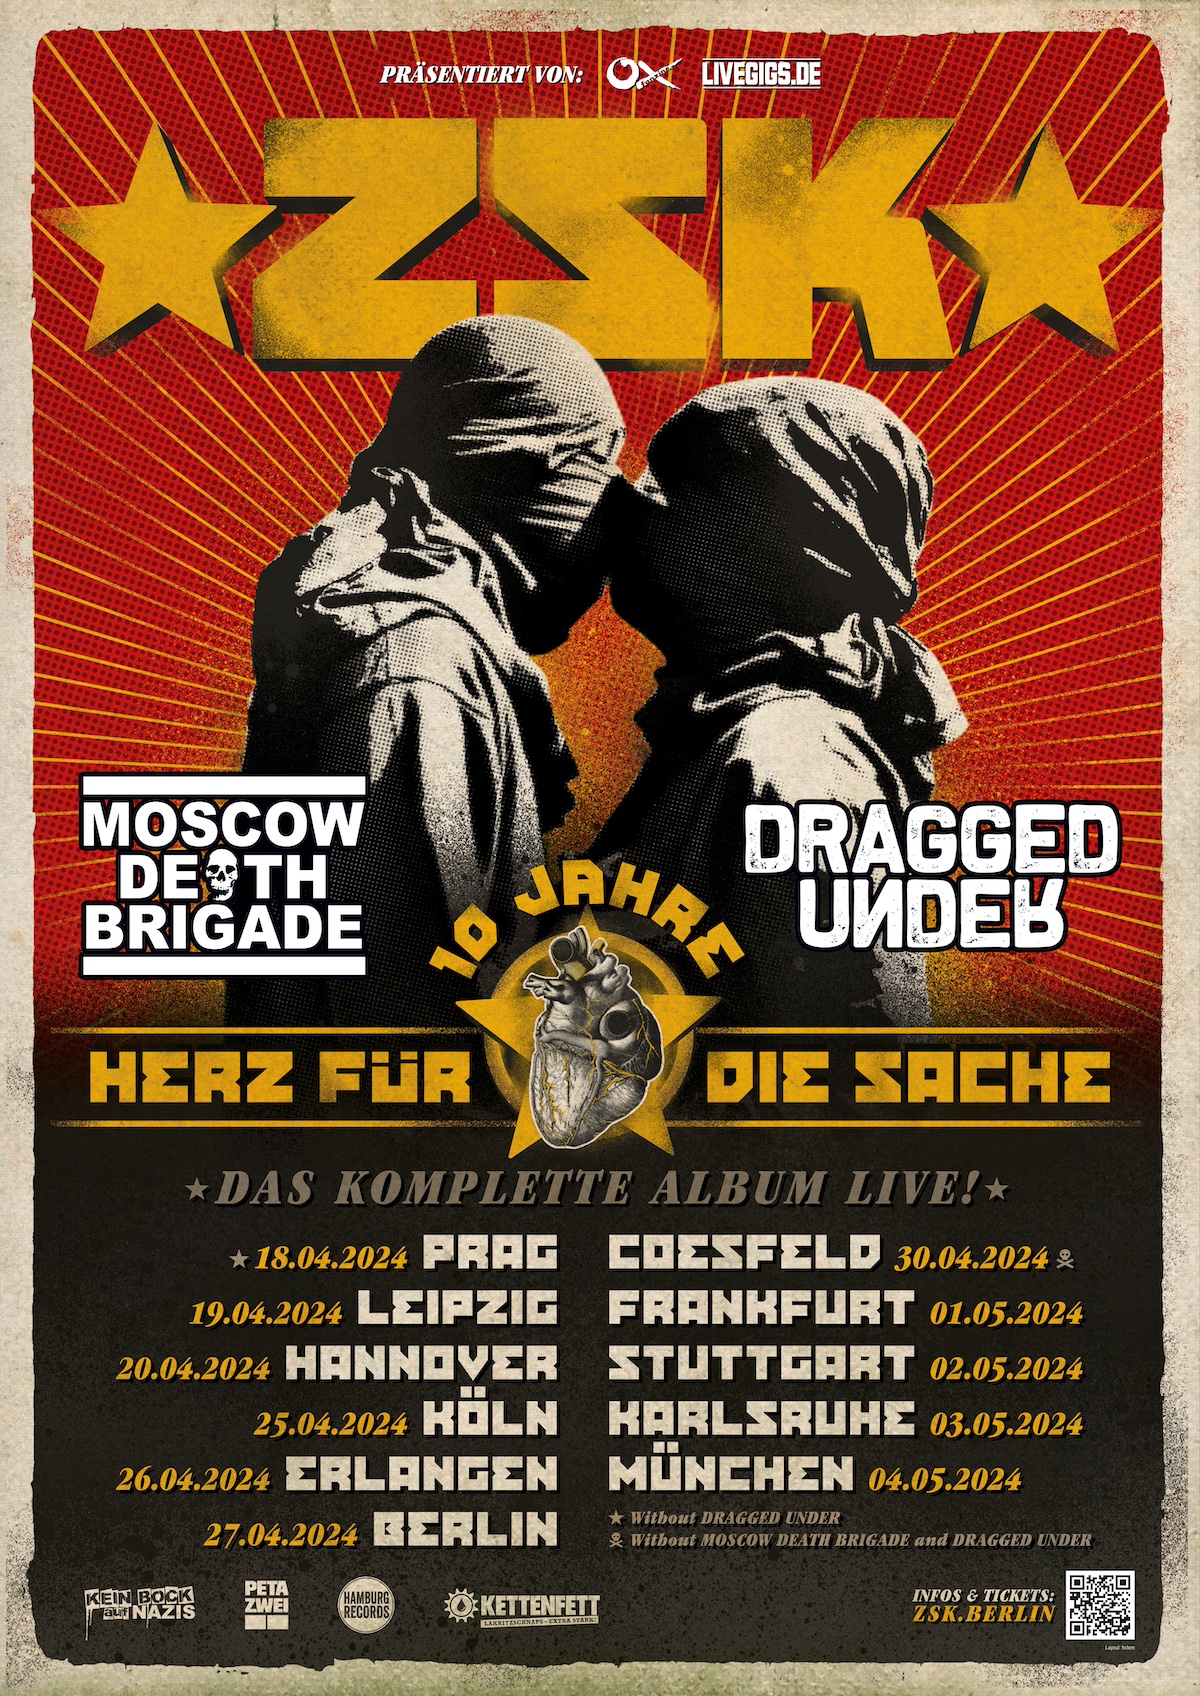 Moscow Death Brigade joining ZSK in April 2024